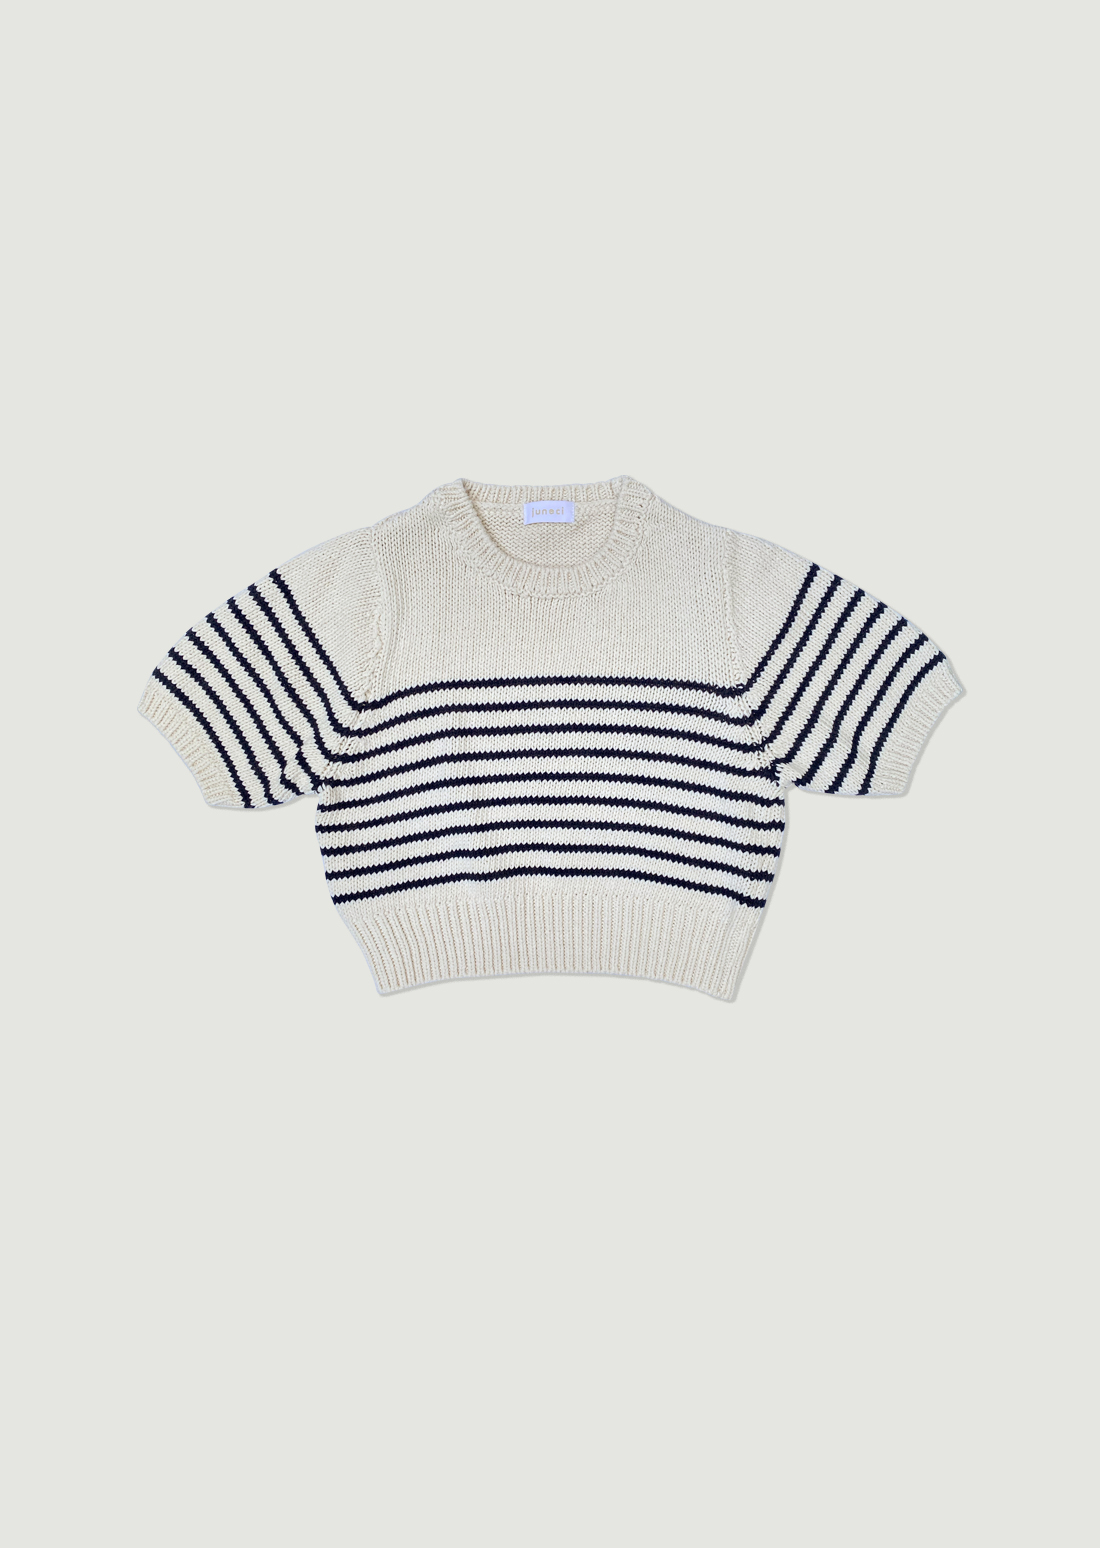 Classic Striped Knit Top (Ivory)